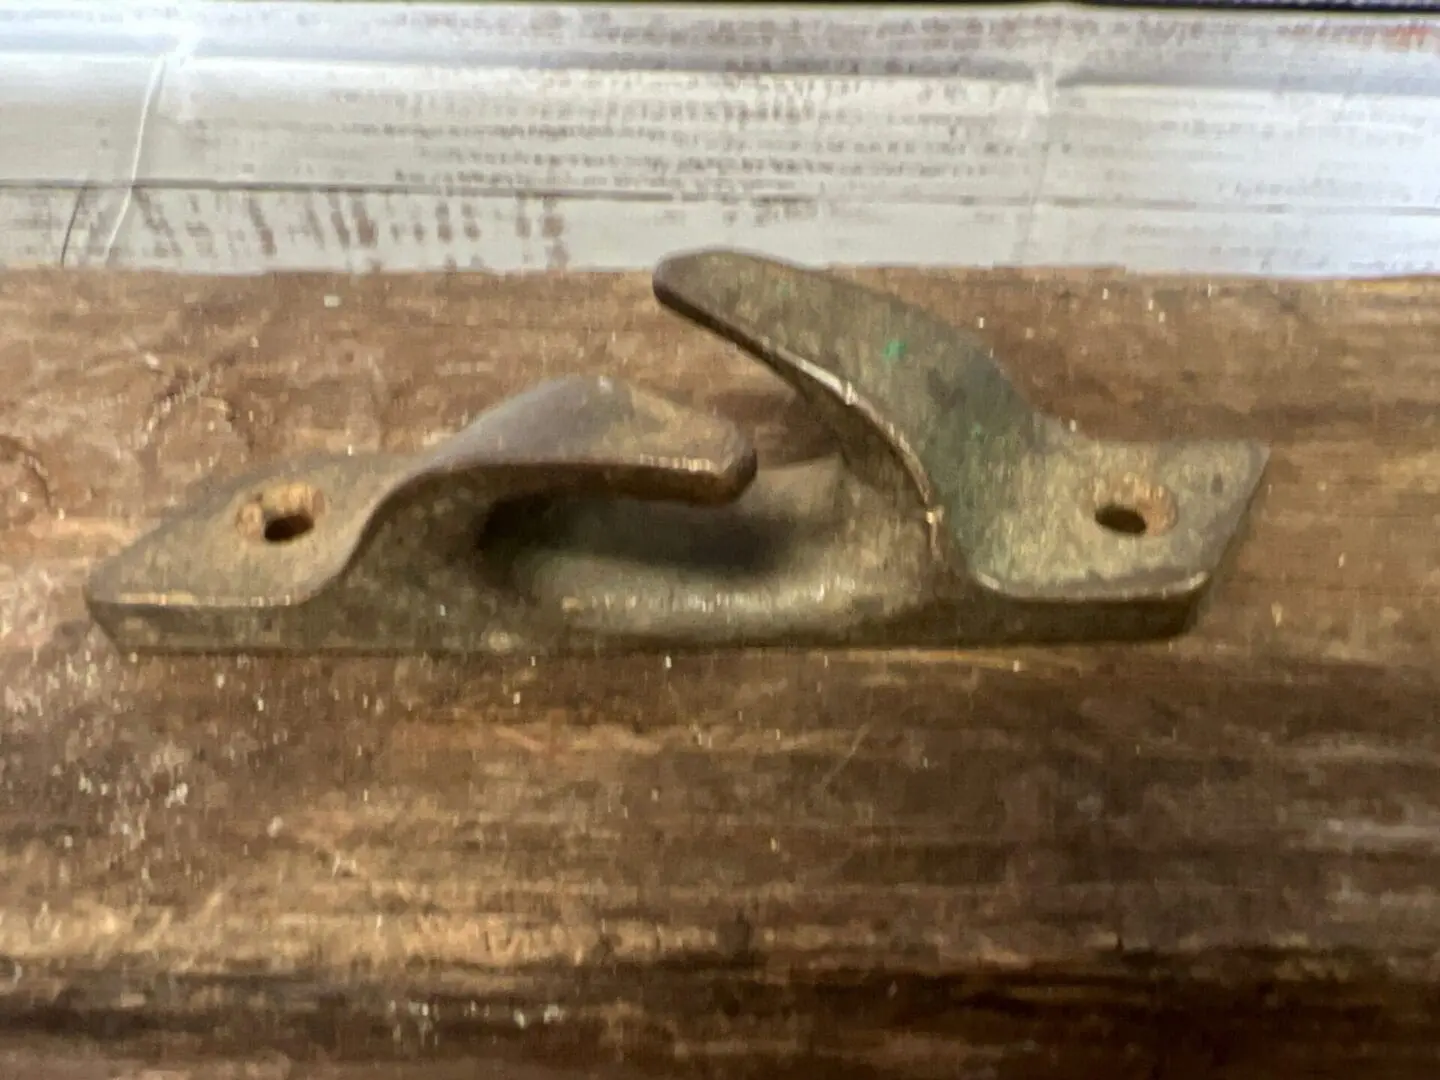 A rusty old wrench sitting on top of a wooden table.